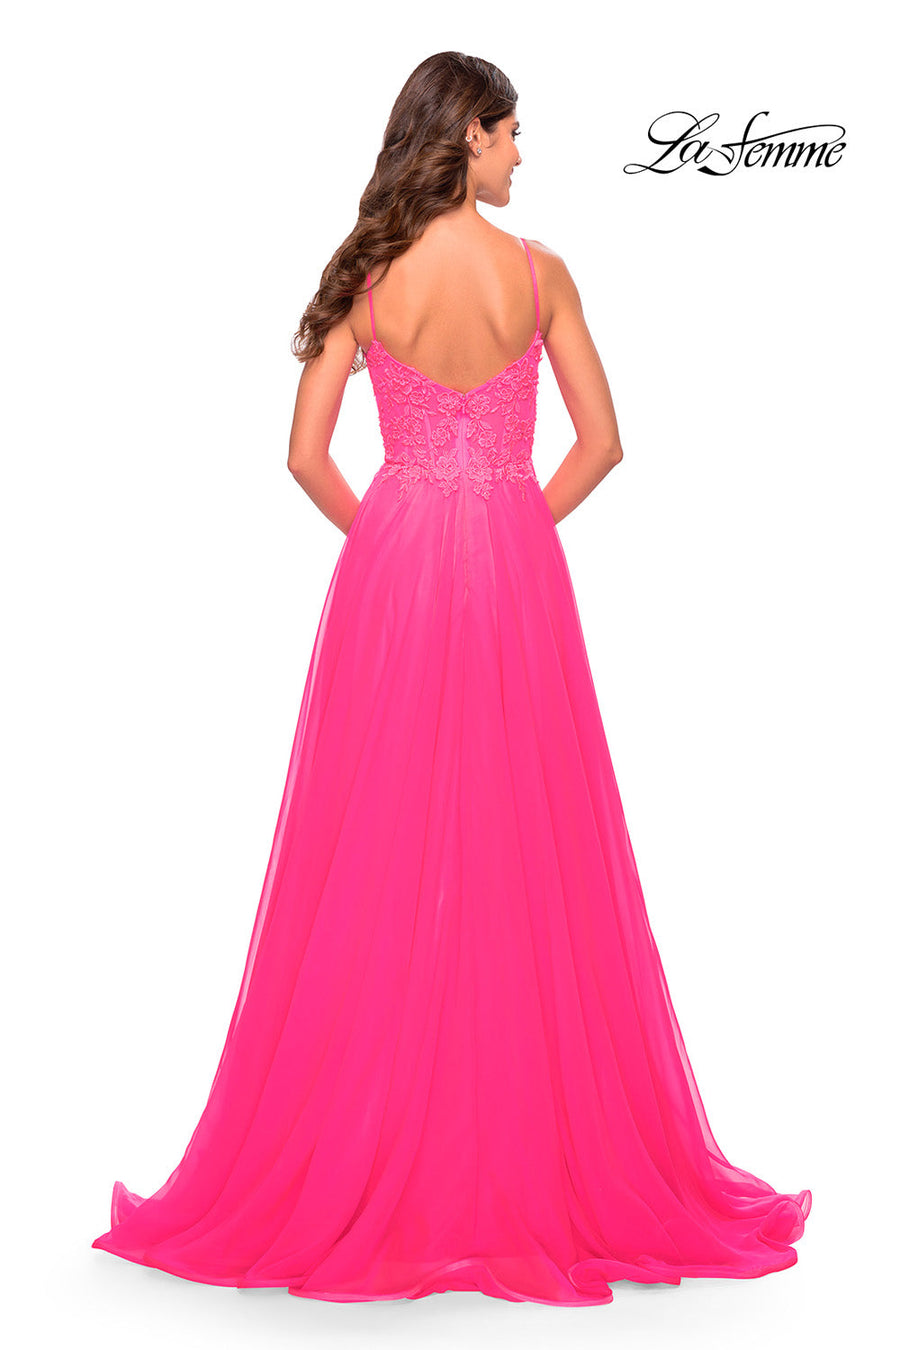 La Femme 31506 prom dress images.  La Femme 31506 is available in these colors: Neon Pink.